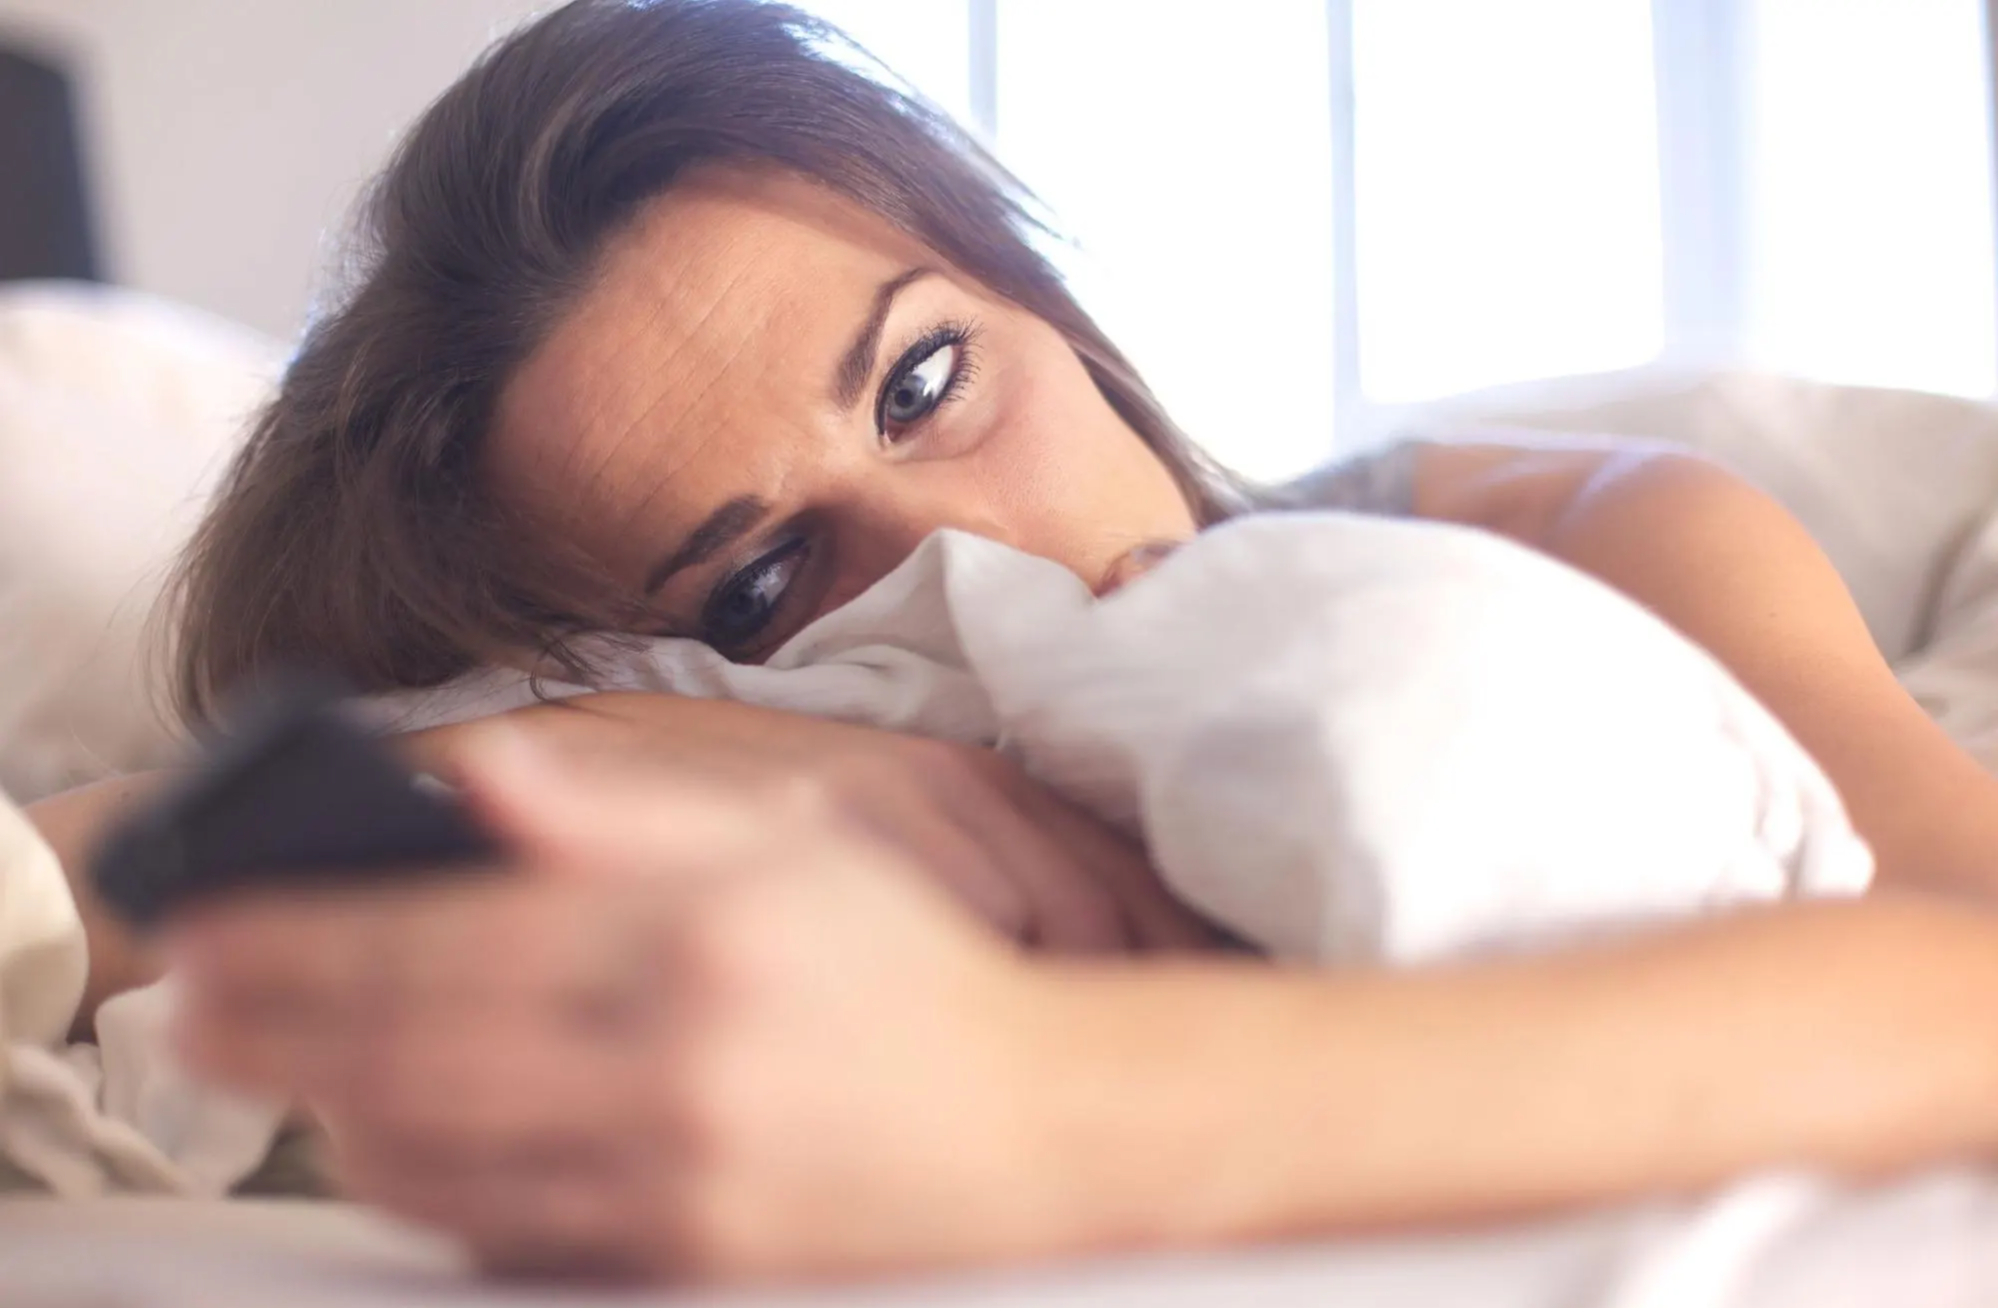 woman laying in bed holding cellphone